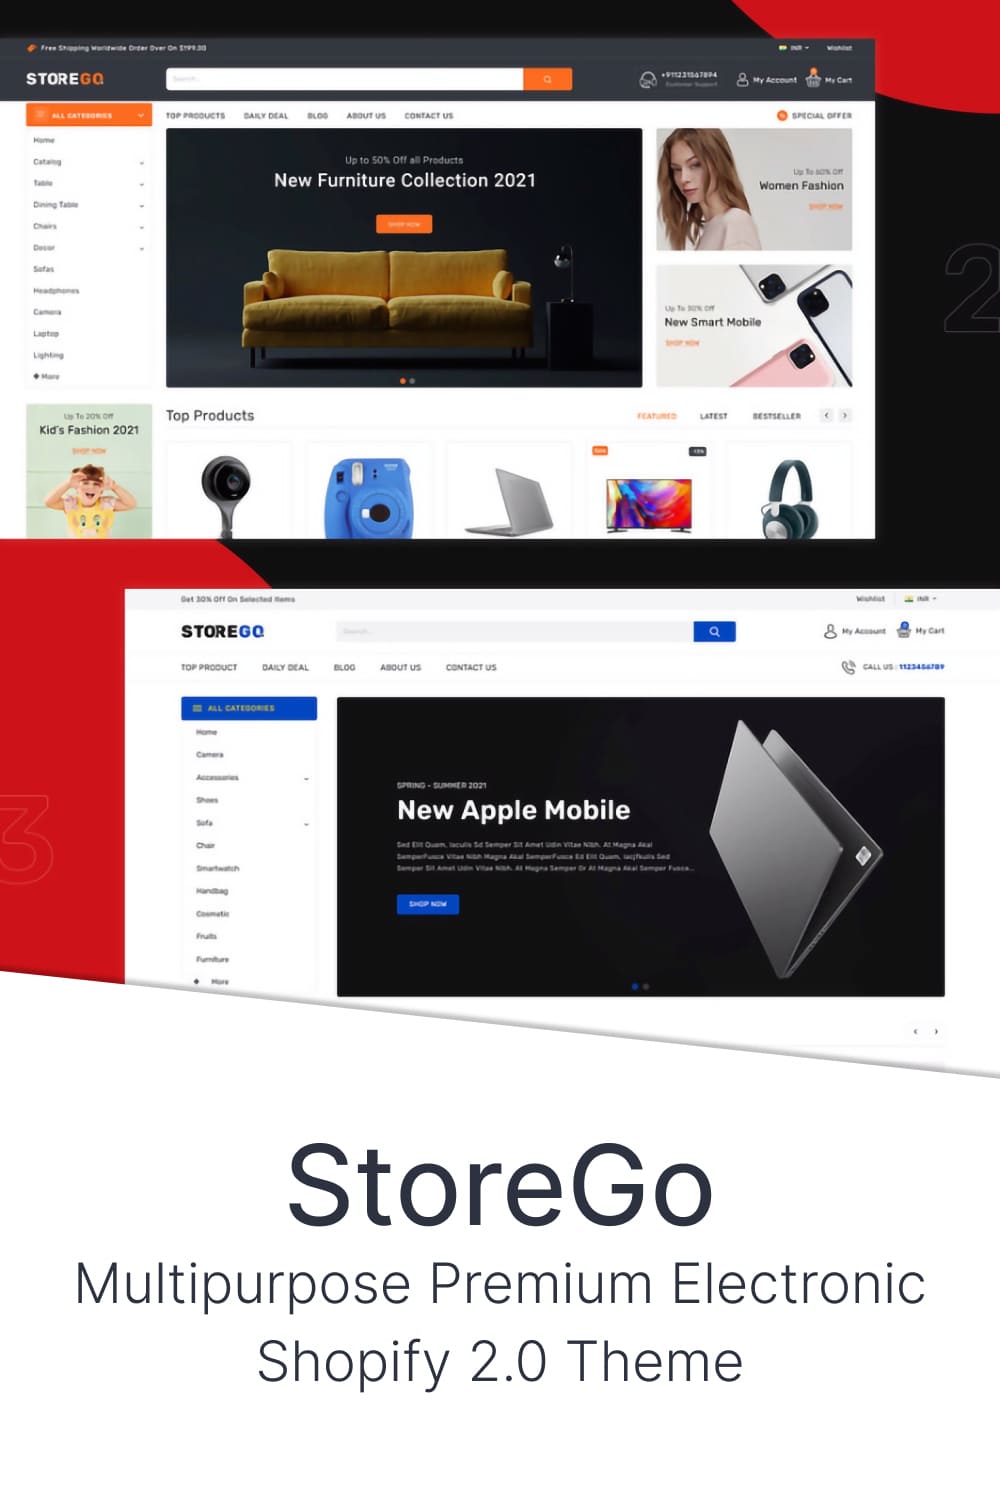 Storego multipurpose premium electronic shopify 2.0 theme, picture for pinterest.